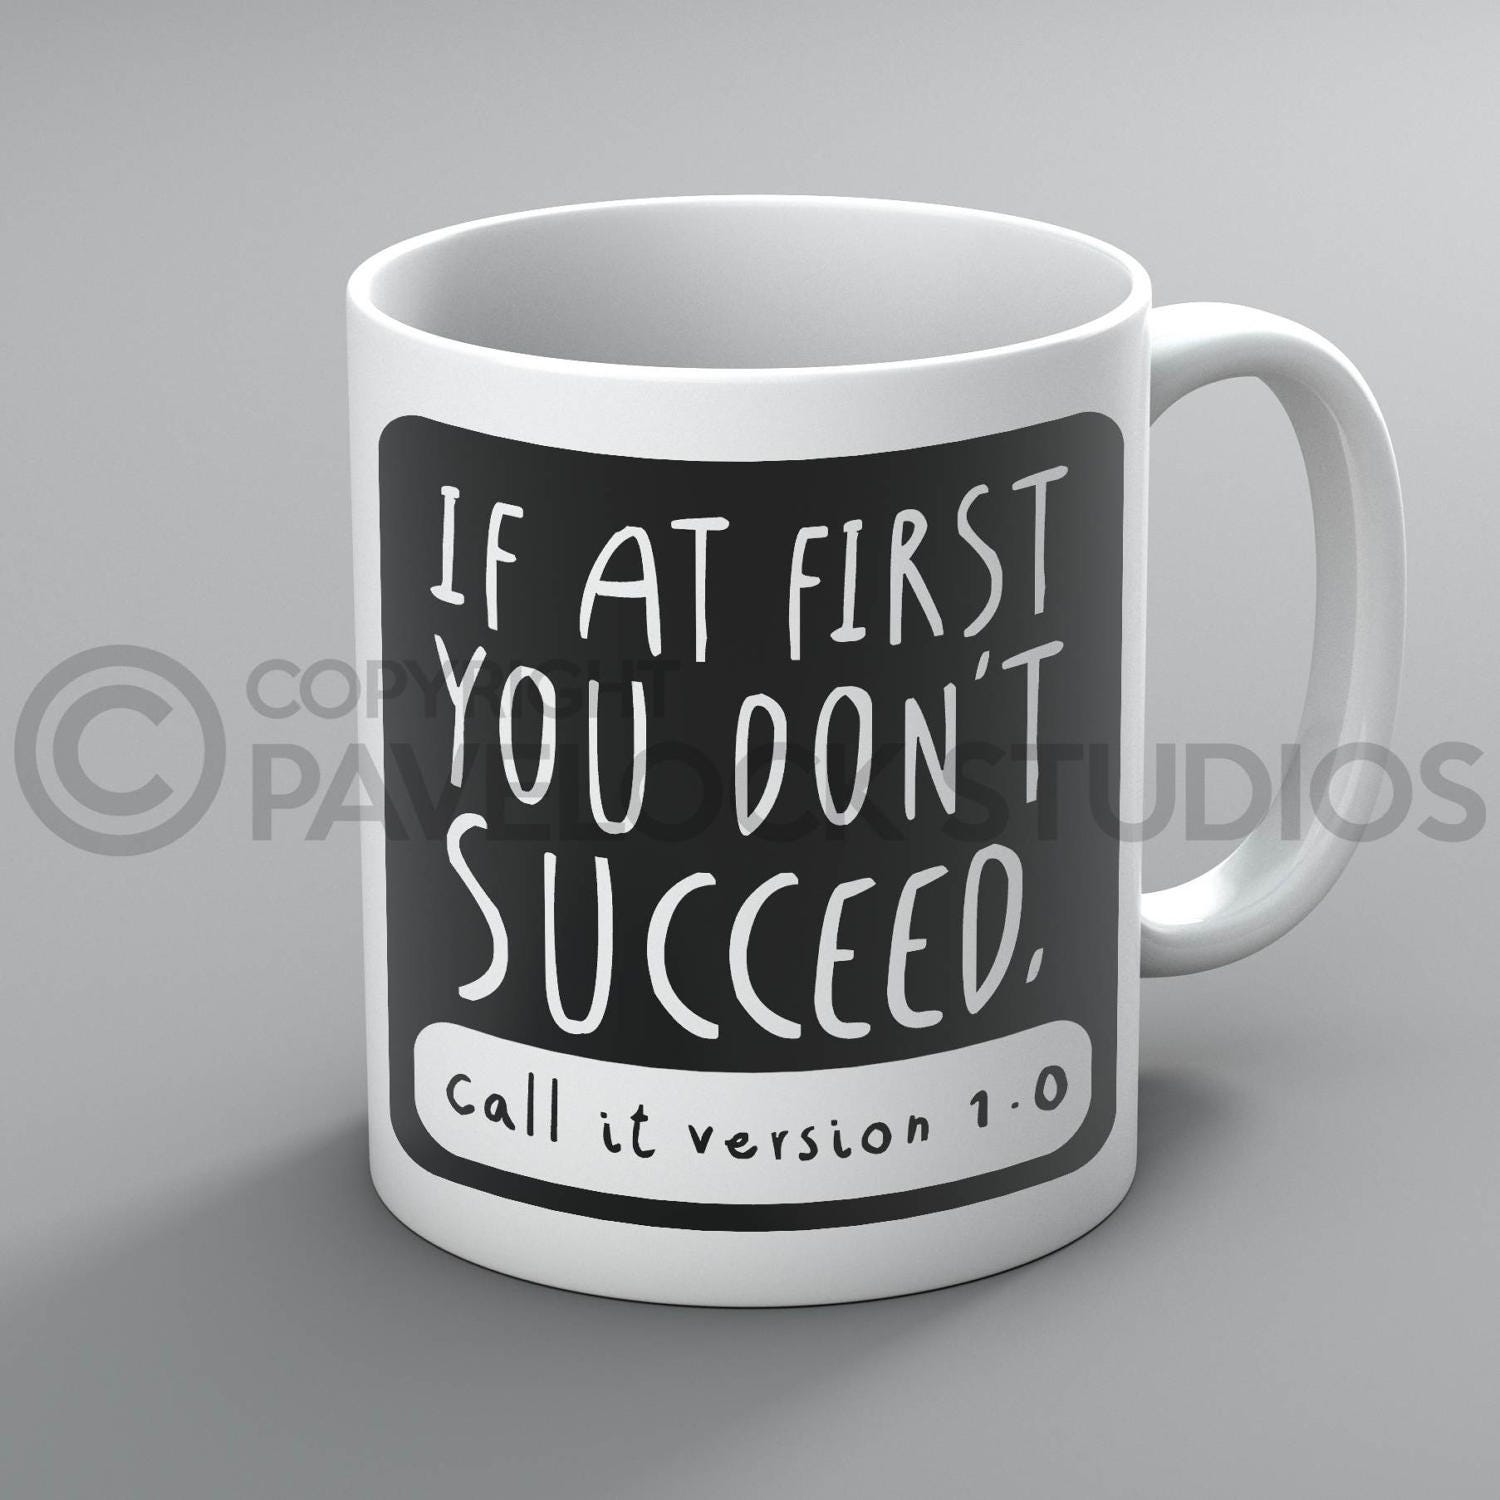 If At First You Don't Succeed Call It Version 1.0 Mug | Etsy